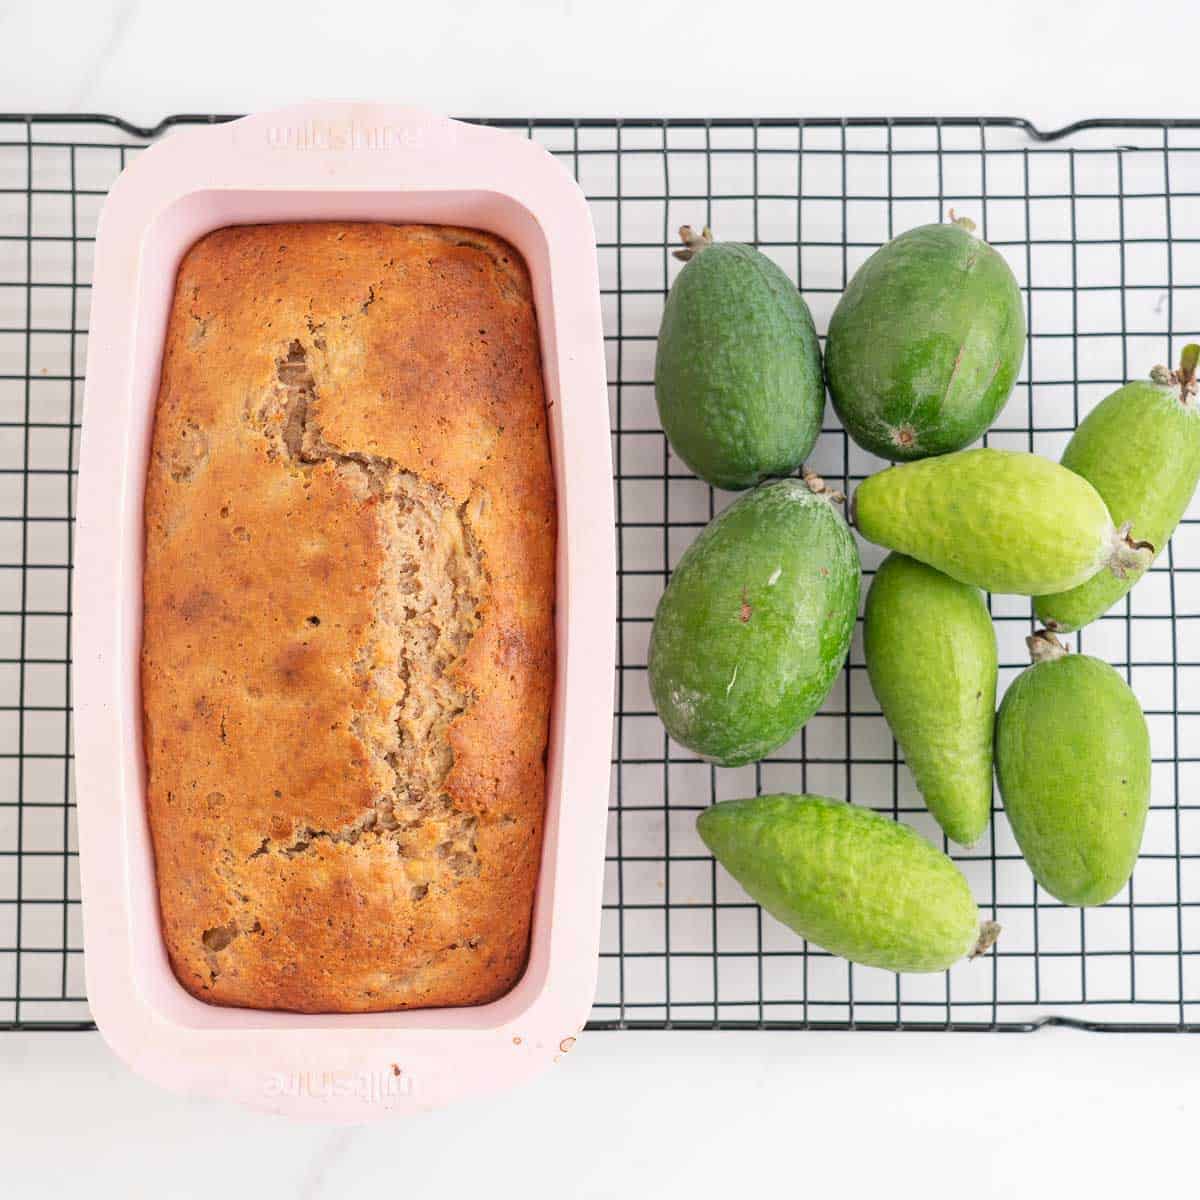 Golden brown loaf in a pink loaf tin, sitting on a cooling rack next to a pile of feijoas.